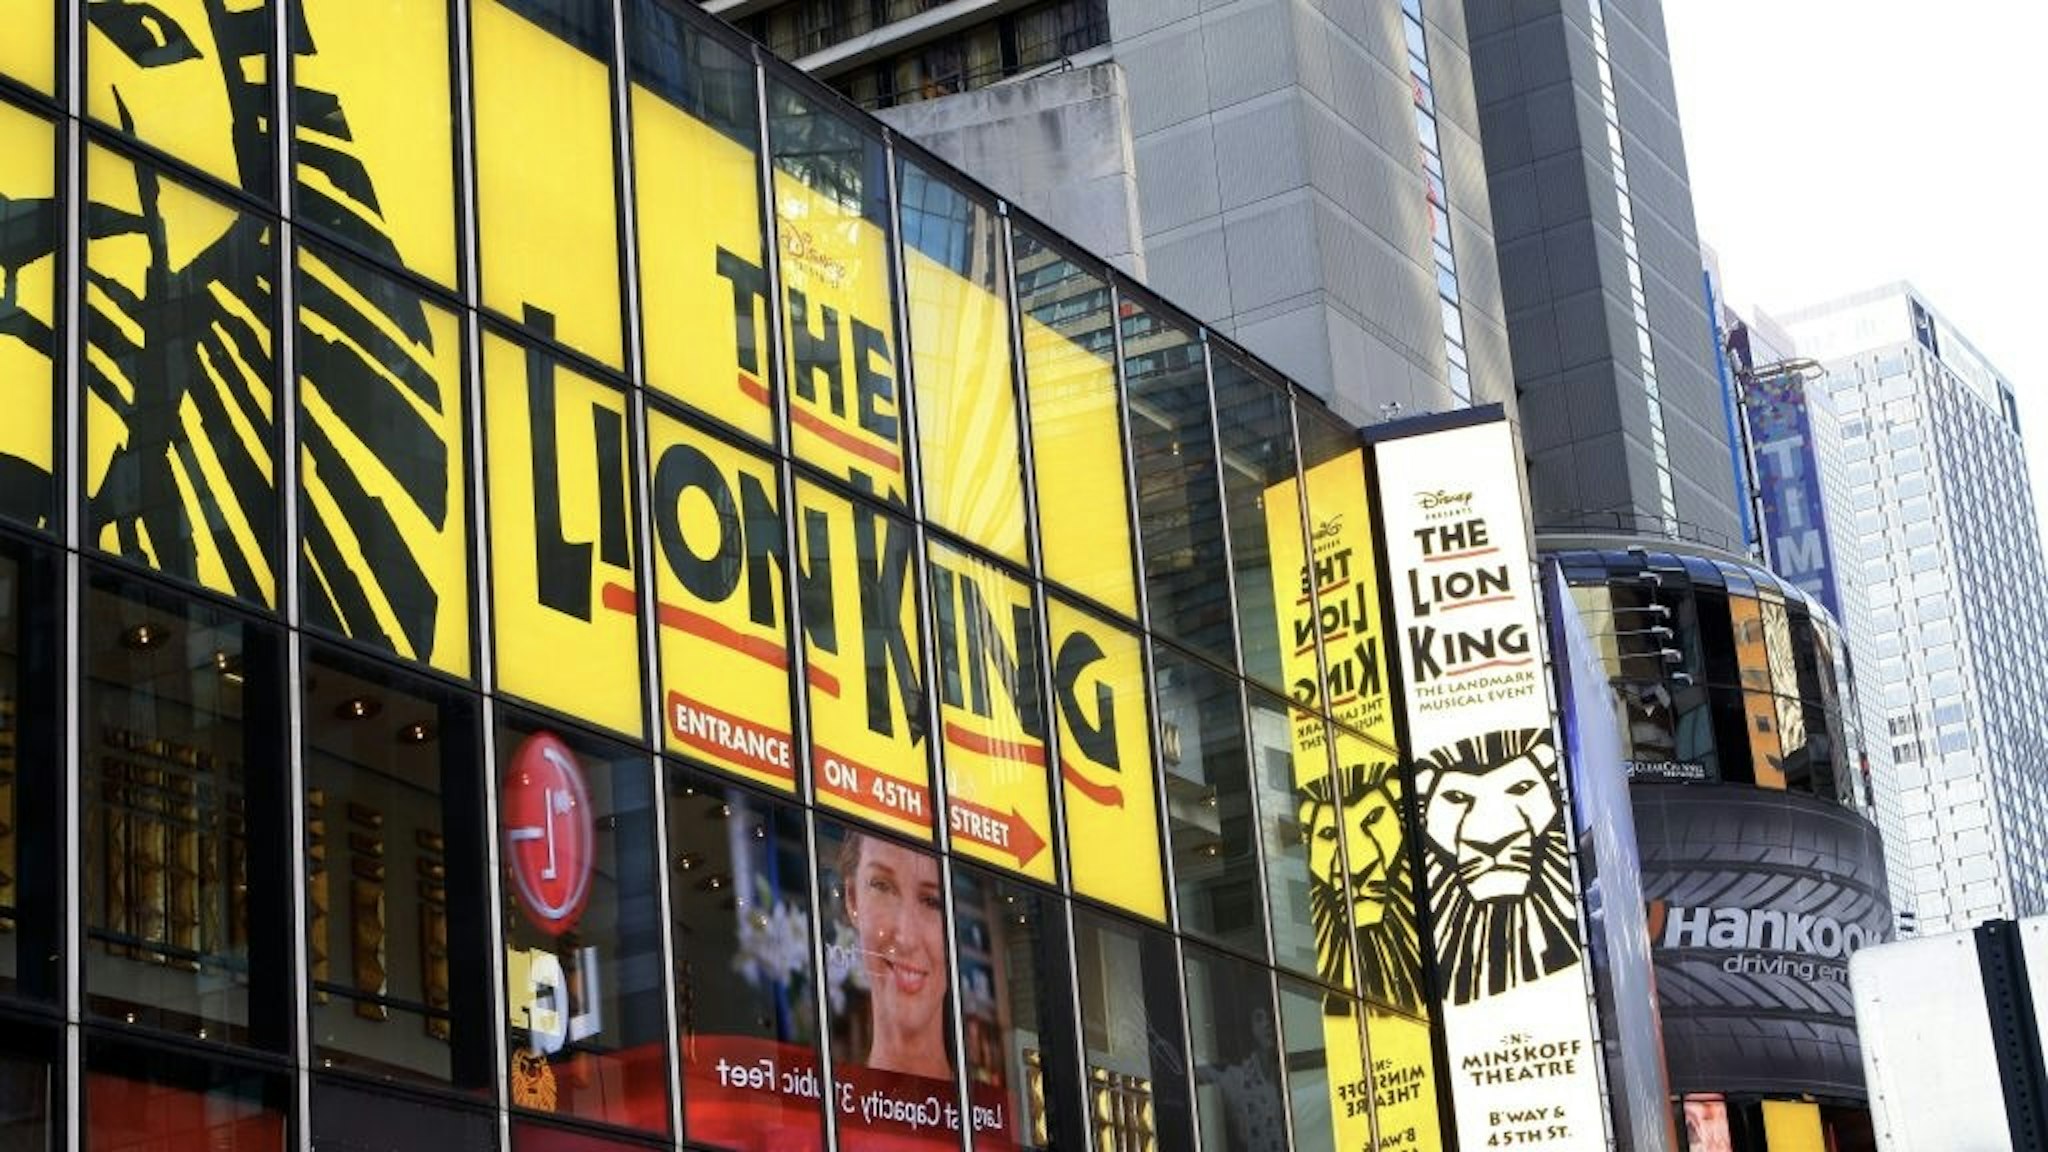 New York Cityscapes And City Views NEW YORK - MAY 11: Lion King billboard along Broadway, in New York, New York on MAY 11, 2012. (Photo By Raymond Boyd/Michael Ochs Archives/Getty Images) Raymond Boyd / Contributor